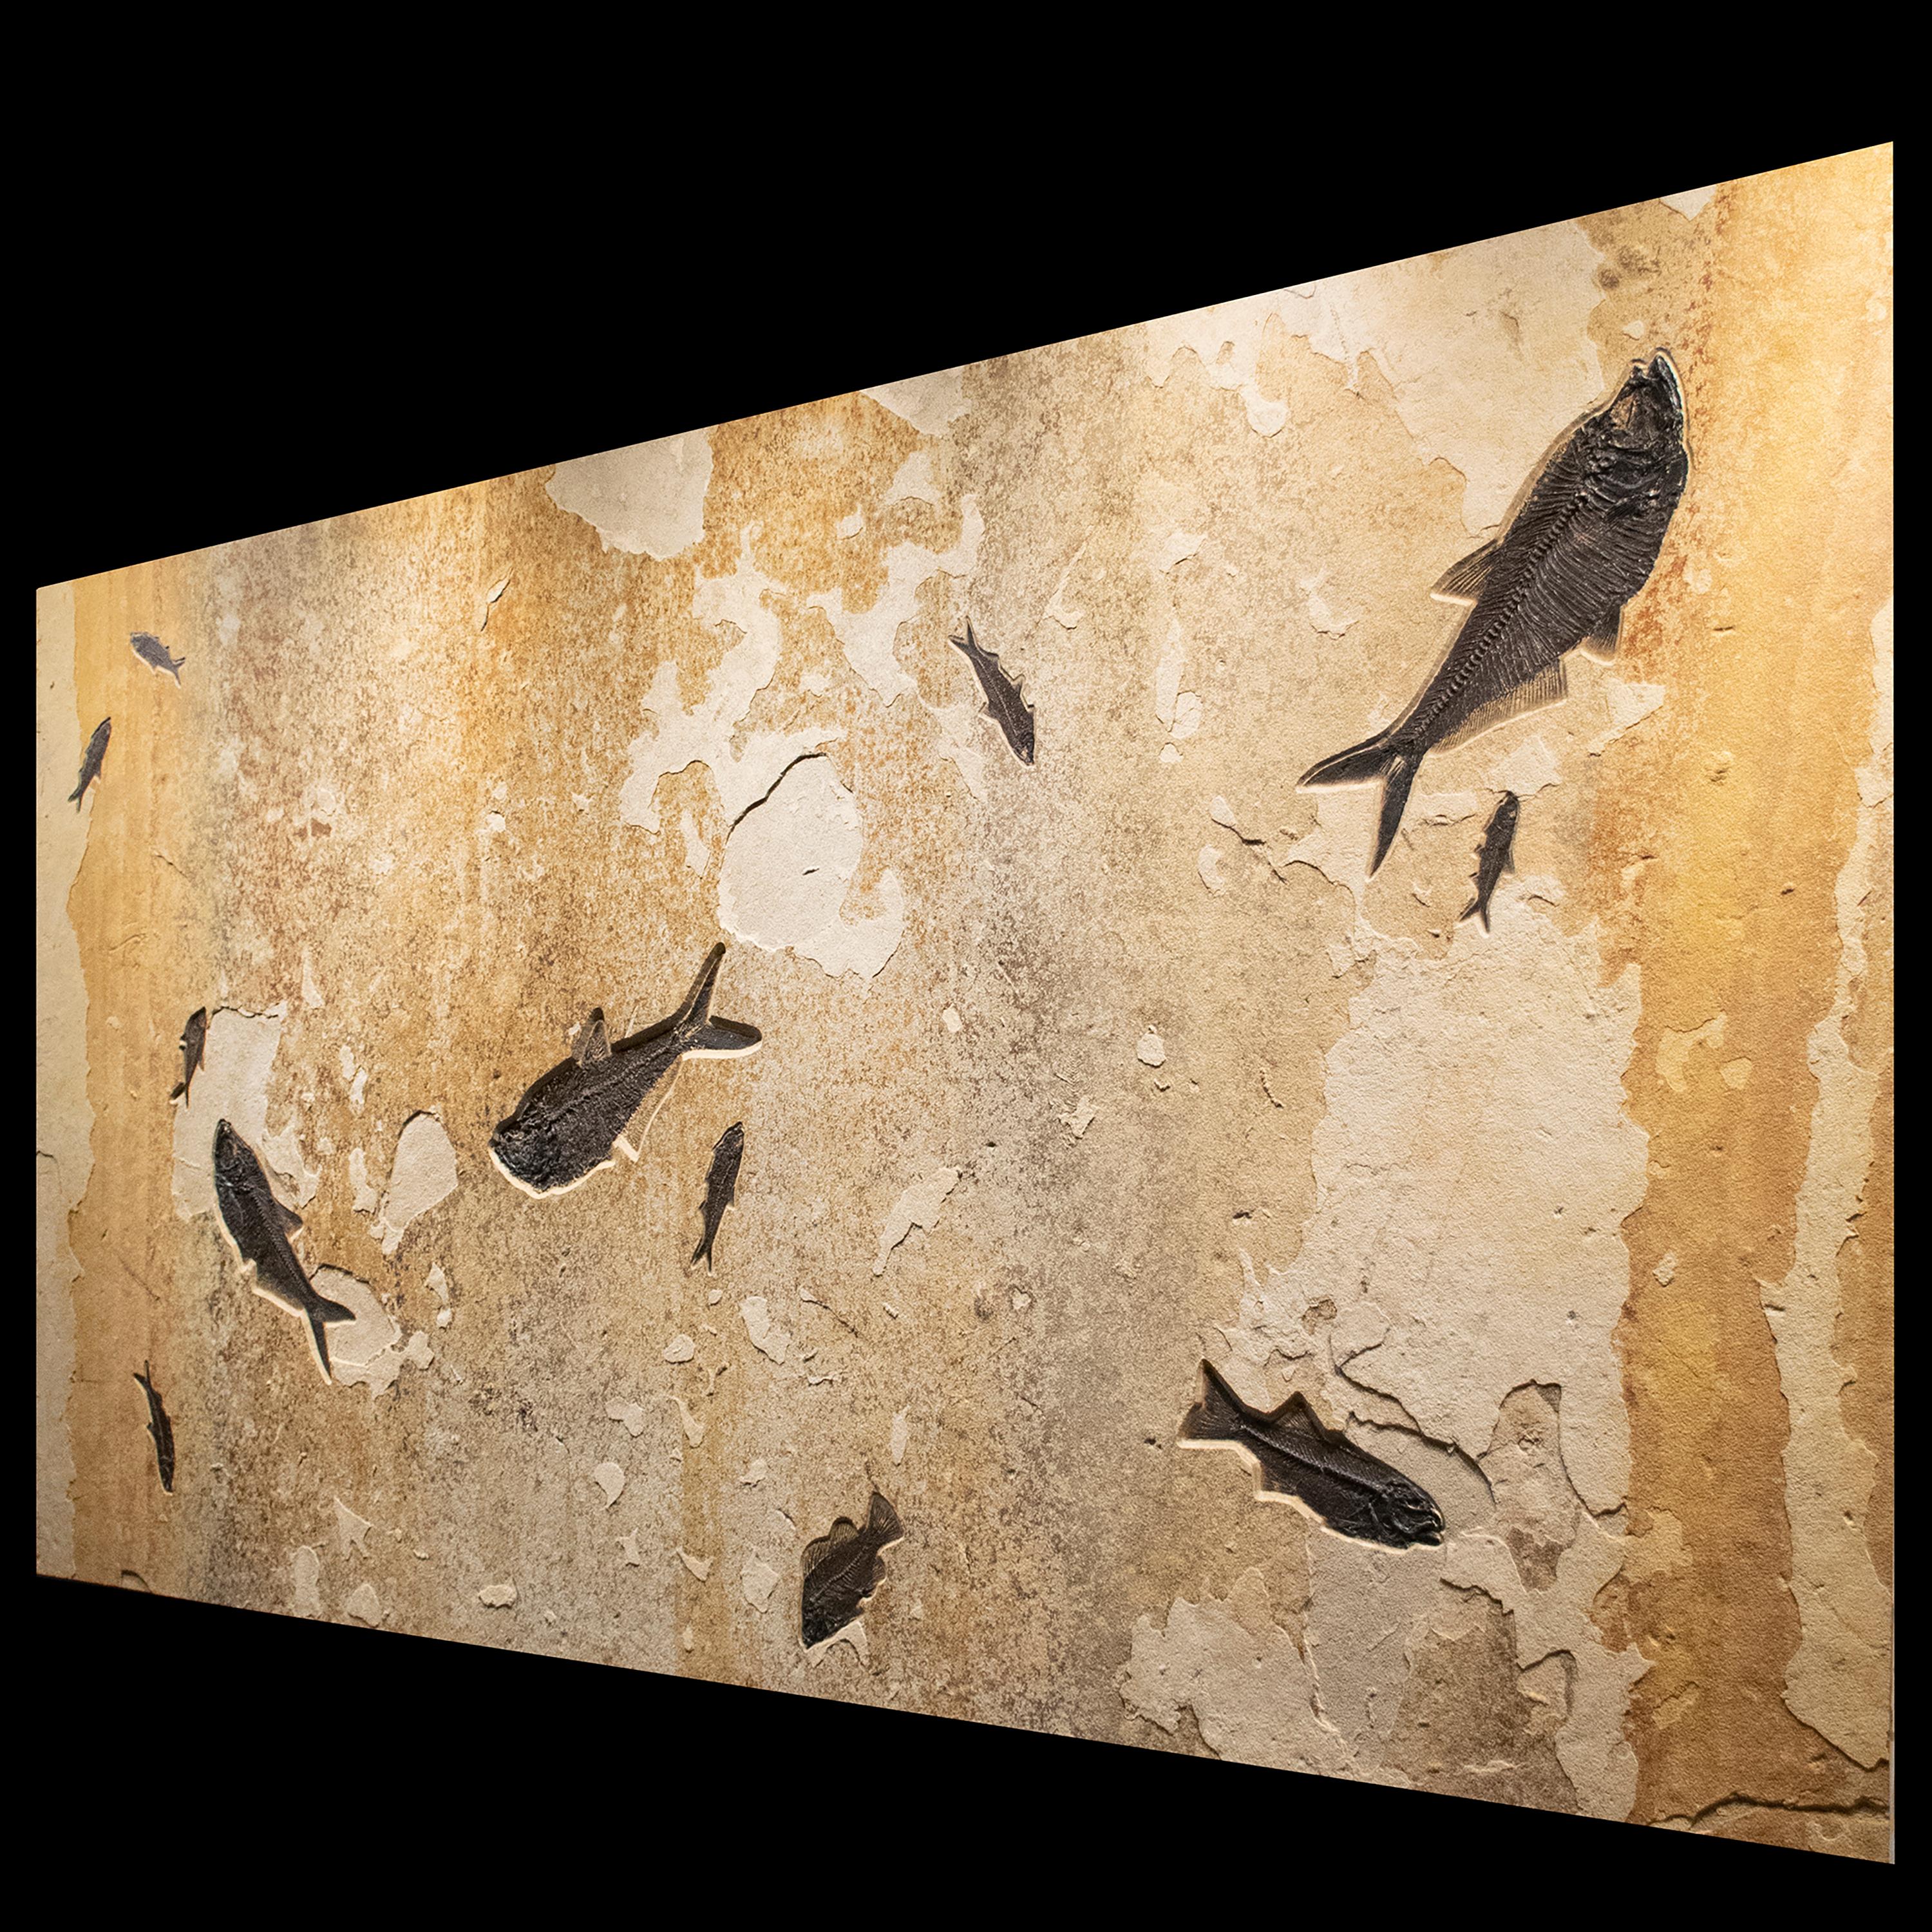 Contemporary 50 Million Year Old Eocene Era Fossil Fish Giant Mural in Stone, from Wyoming